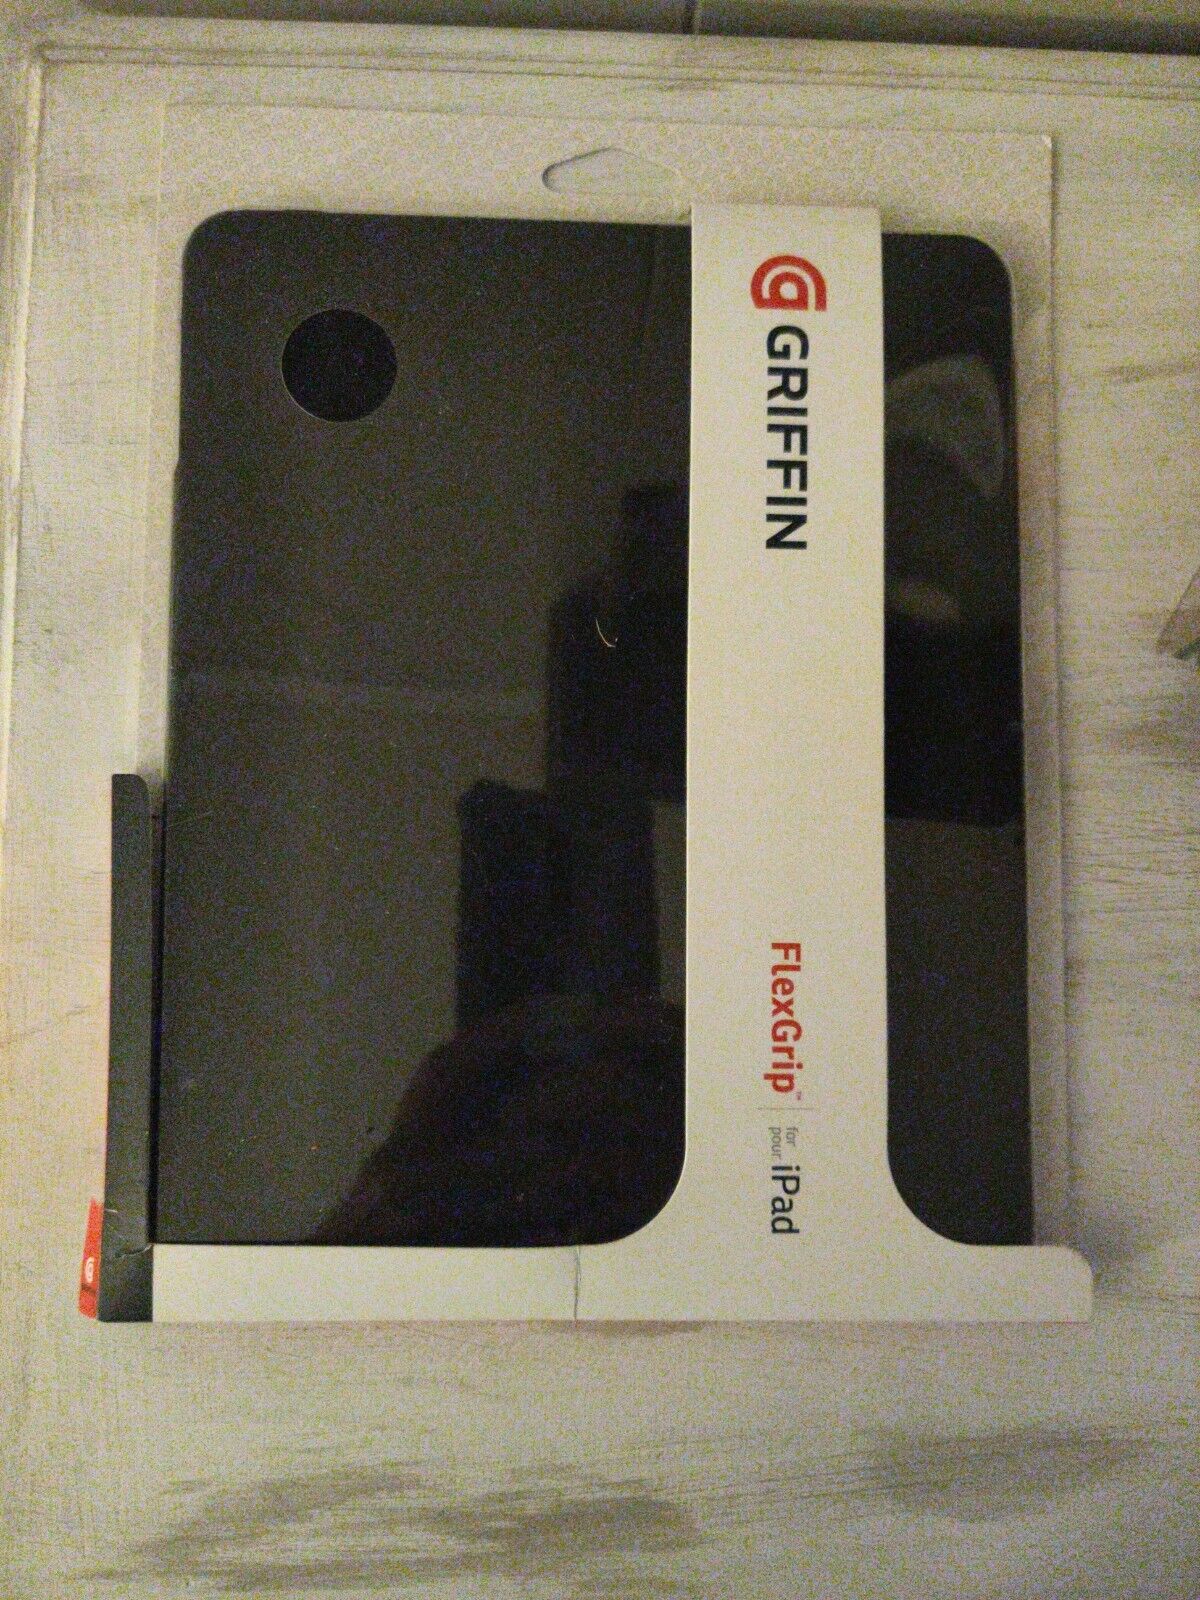 Griffin iPad FlexGrip Case First Generation Silicone Black Soft Cover New